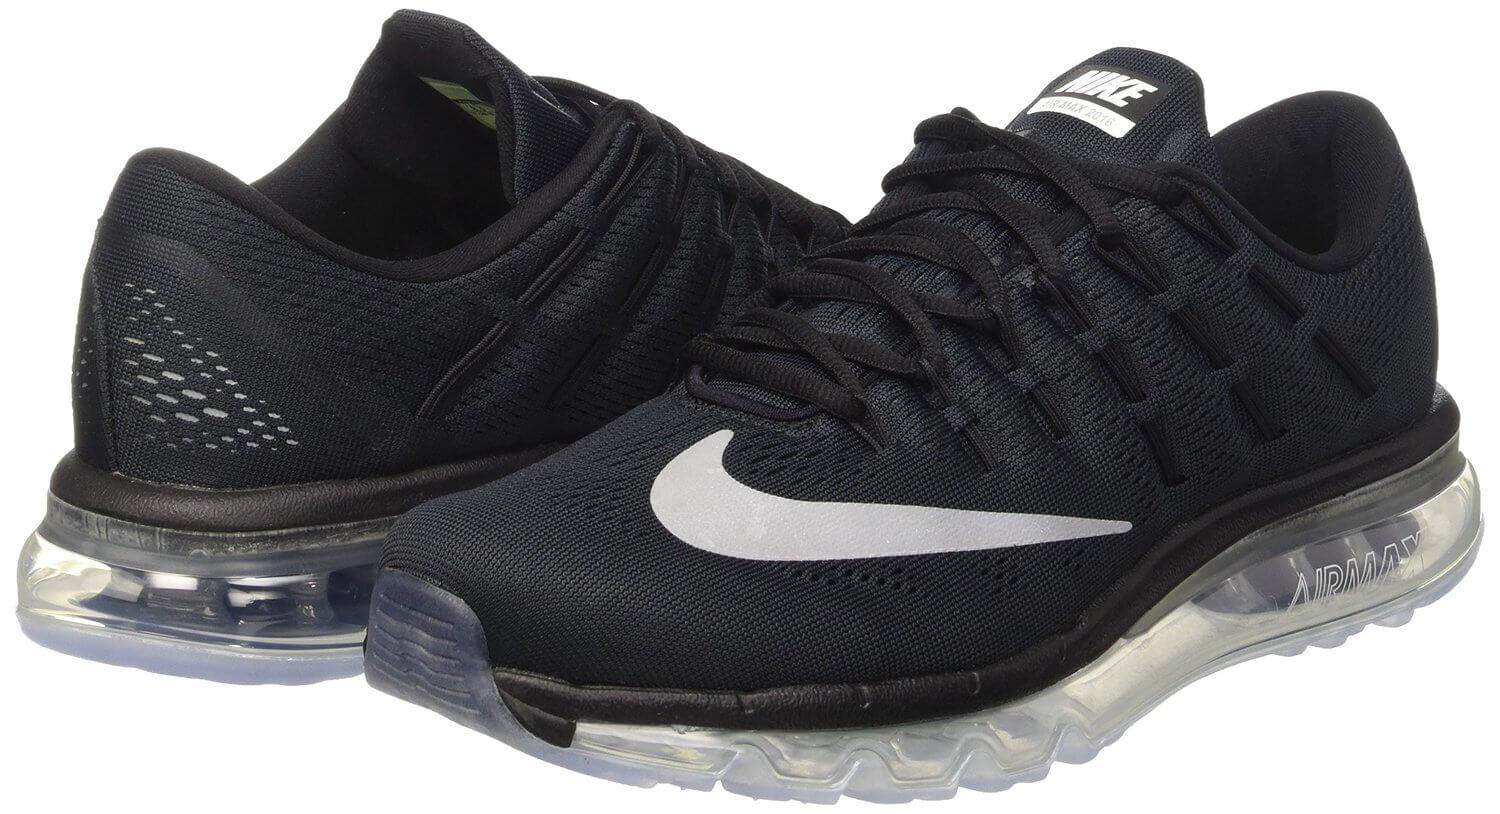 The Nike Air Max 2016 presents a combination of cushion and responsiveness difficult to find elsewhere.